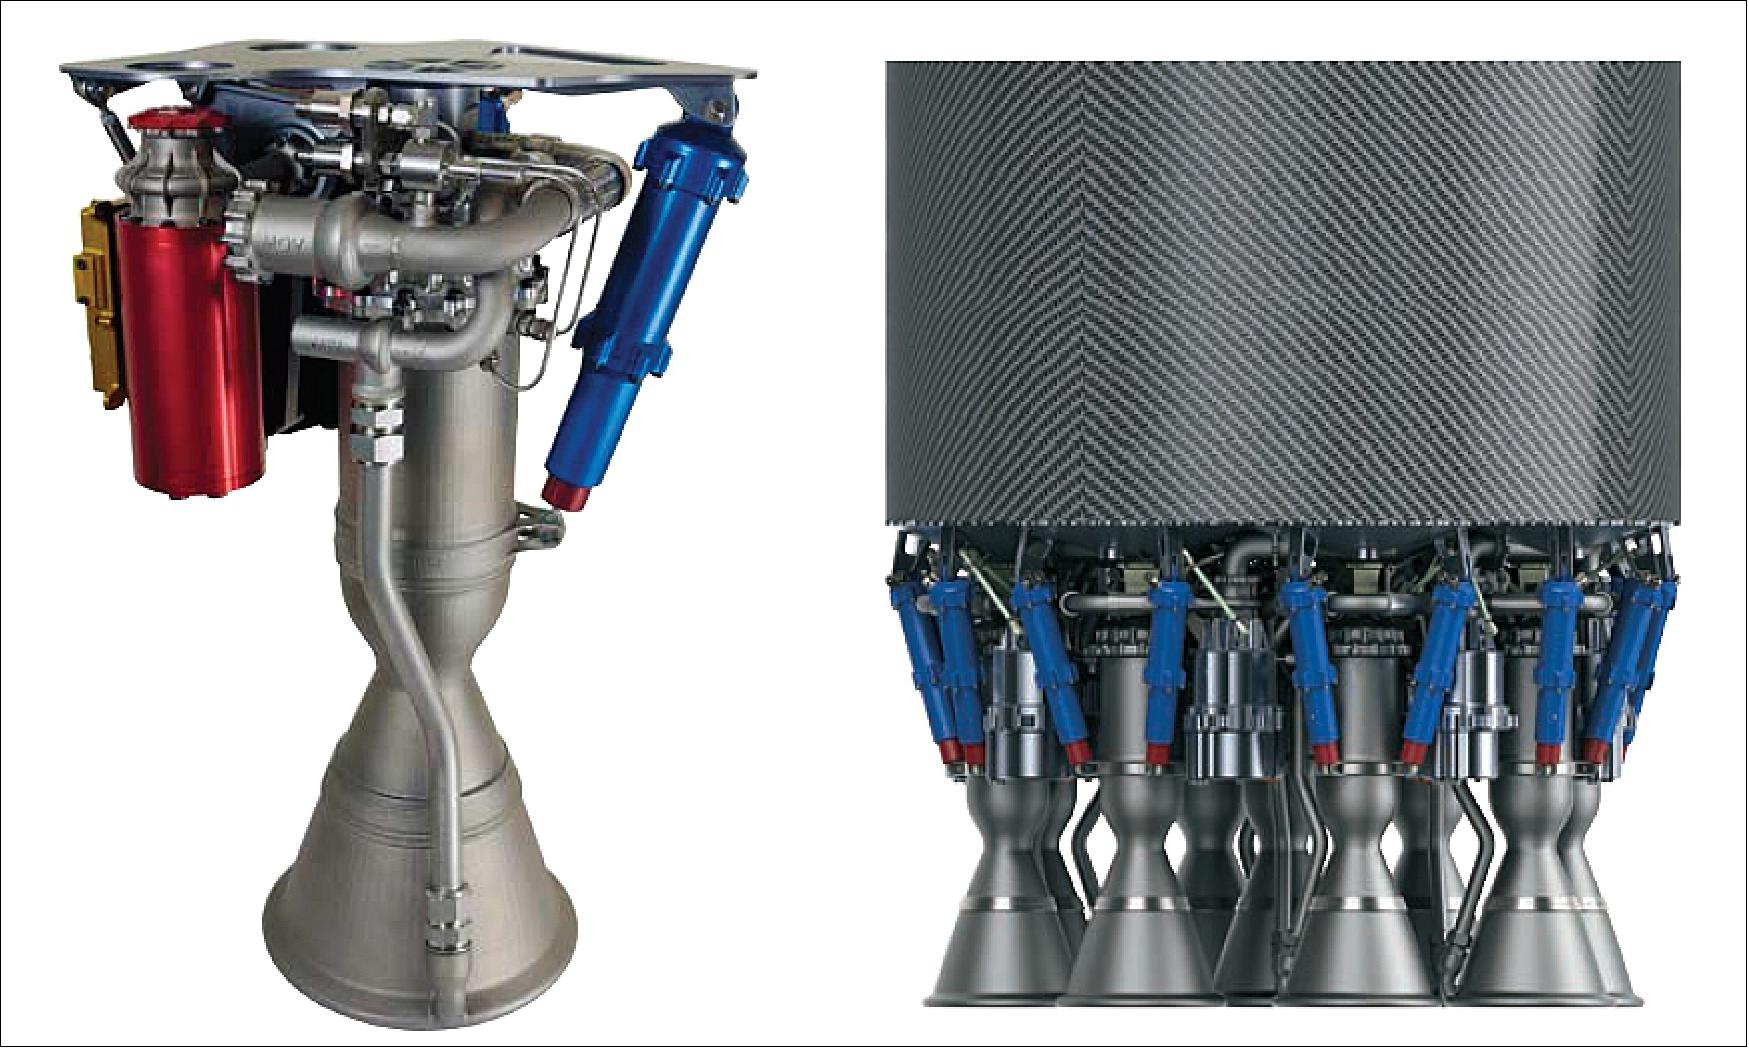 Figure 3: Left: Rutherford electro turbo-pumped engine. Right: Rutherford Stage 1 configuration with nine engines (image credit: Rocket Lab)